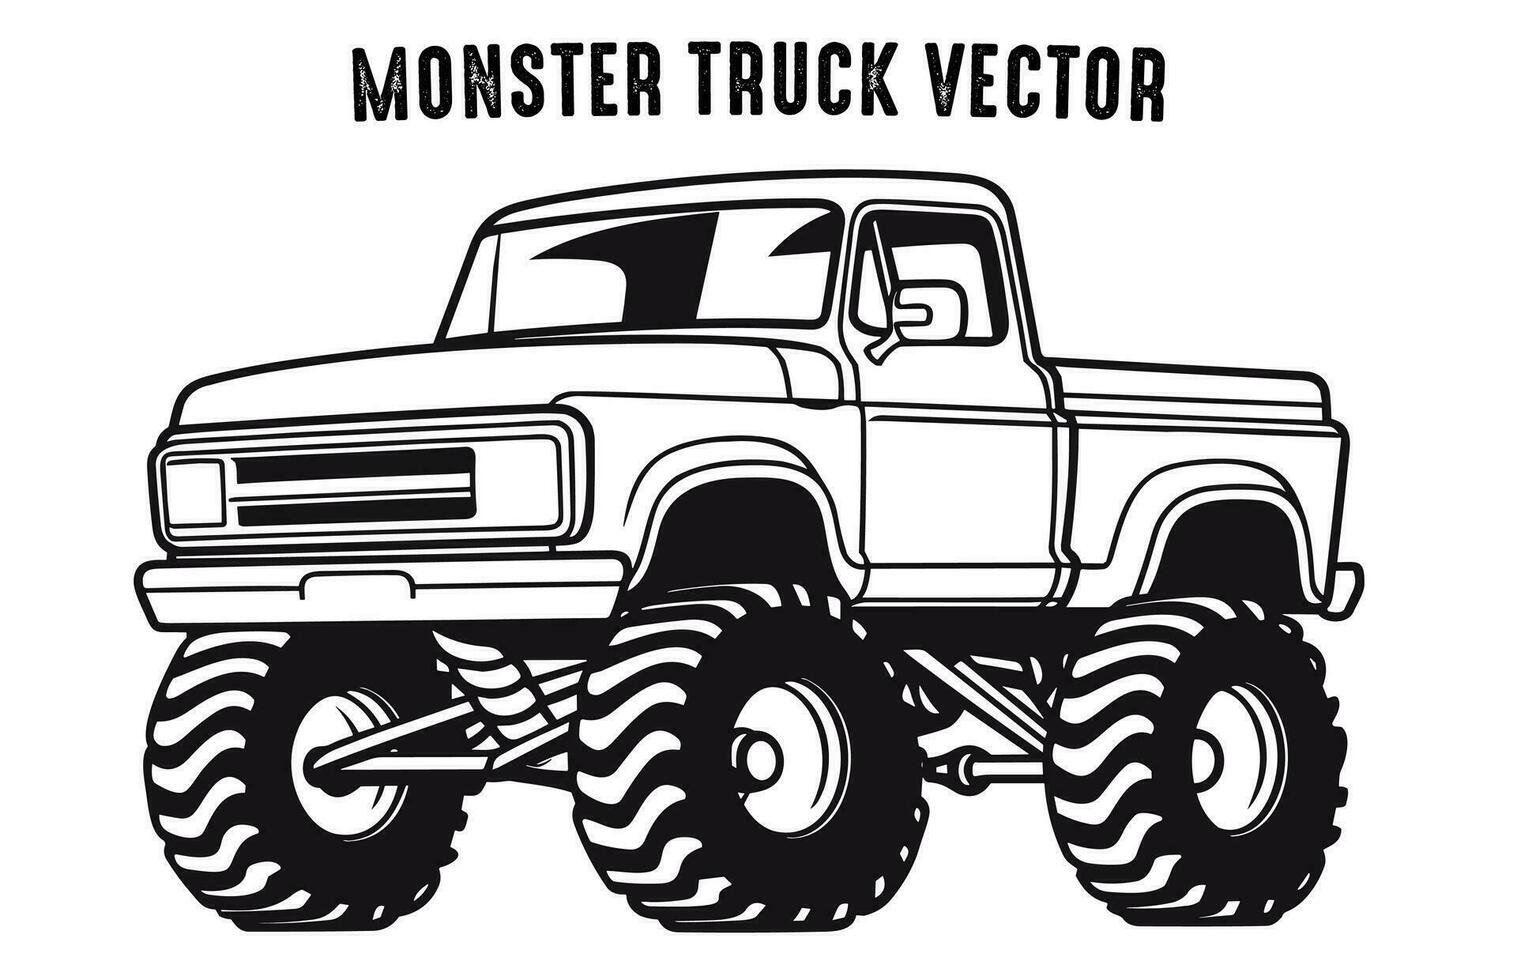 Vintage Monster Truck Vector outline isolated on a White background